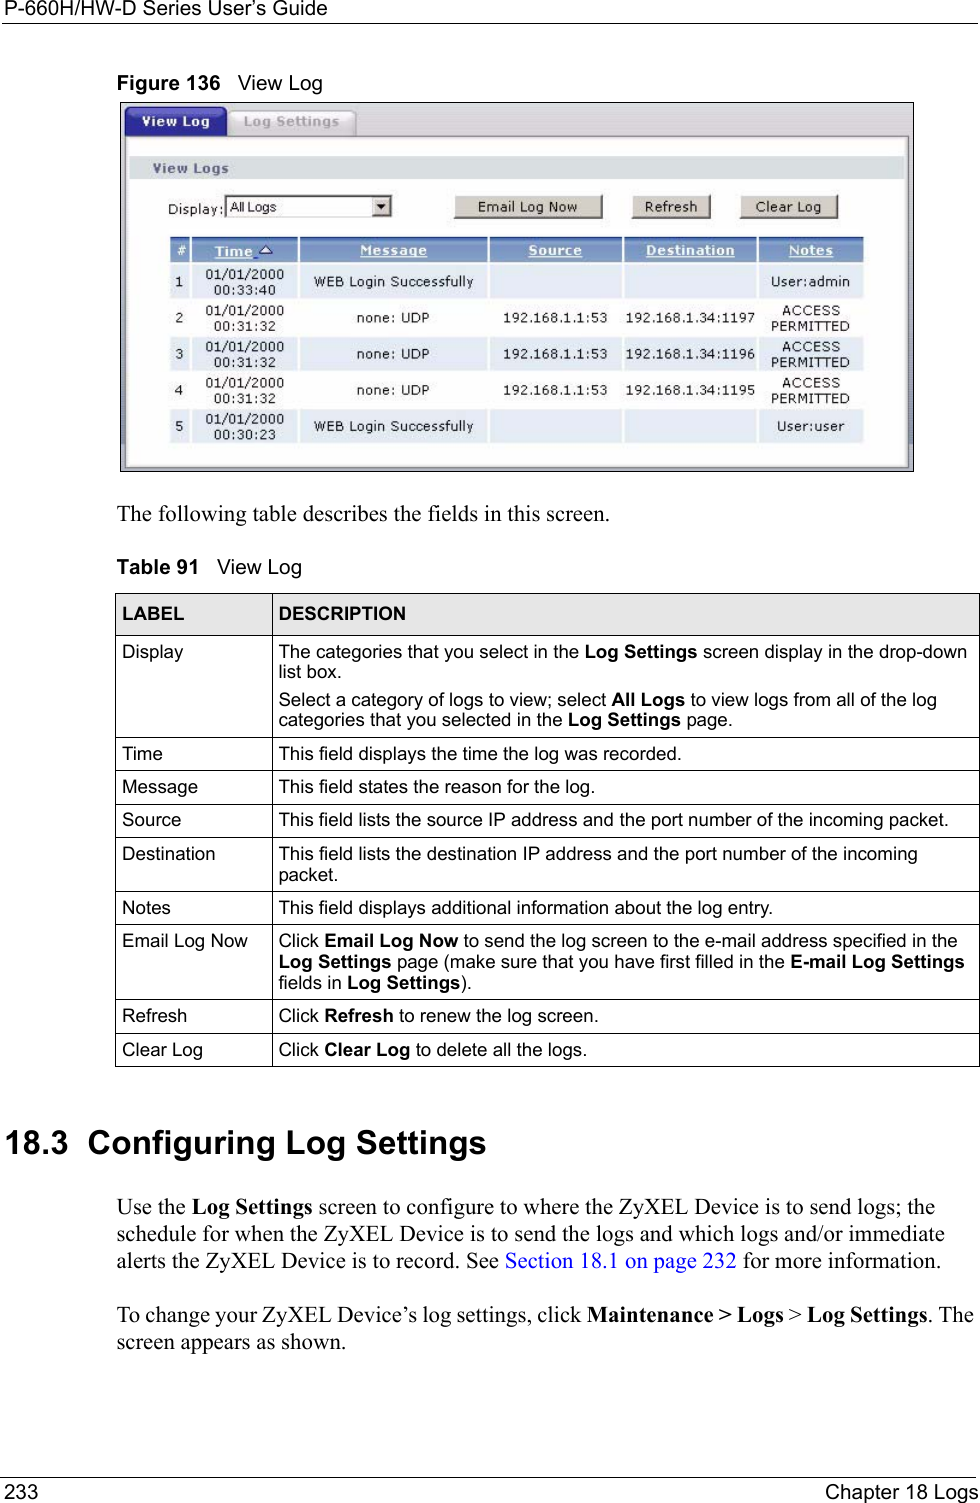 P-660H/HW-D Series User’s Guide233 Chapter 18 LogsFigure 136   View LogThe following table describes the fields in this screen.   18.3  Configuring Log Settings Use the Log Settings screen to configure to where the ZyXEL Device is to send logs; the schedule for when the ZyXEL Device is to send the logs and which logs and/or immediate alerts the ZyXEL Device is to record. See Section 18.1 on page 232 for more information. To change your ZyXEL Device’s log settings, click Maintenance &gt; Logs &gt; Log Settings. The screen appears as shown.Table 91   View LogLABEL DESCRIPTIONDisplay  The categories that you select in the Log Settings screen display in the drop-down list box.Select a category of logs to view; select All Logs to view logs from all of the log categories that you selected in the Log Settings page. Time  This field displays the time the log was recorded. Message This field states the reason for the log.Source This field lists the source IP address and the port number of the incoming packet.Destination  This field lists the destination IP address and the port number of the incoming packet.Notes This field displays additional information about the log entry. Email Log Now  Click Email Log Now to send the log screen to the e-mail address specified in the Log Settings page (make sure that you have first filled in the E-mail Log Settings fields in Log Settings).Refresh Click Refresh to renew the log screen. Clear Log  Click Clear Log to delete all the logs. 